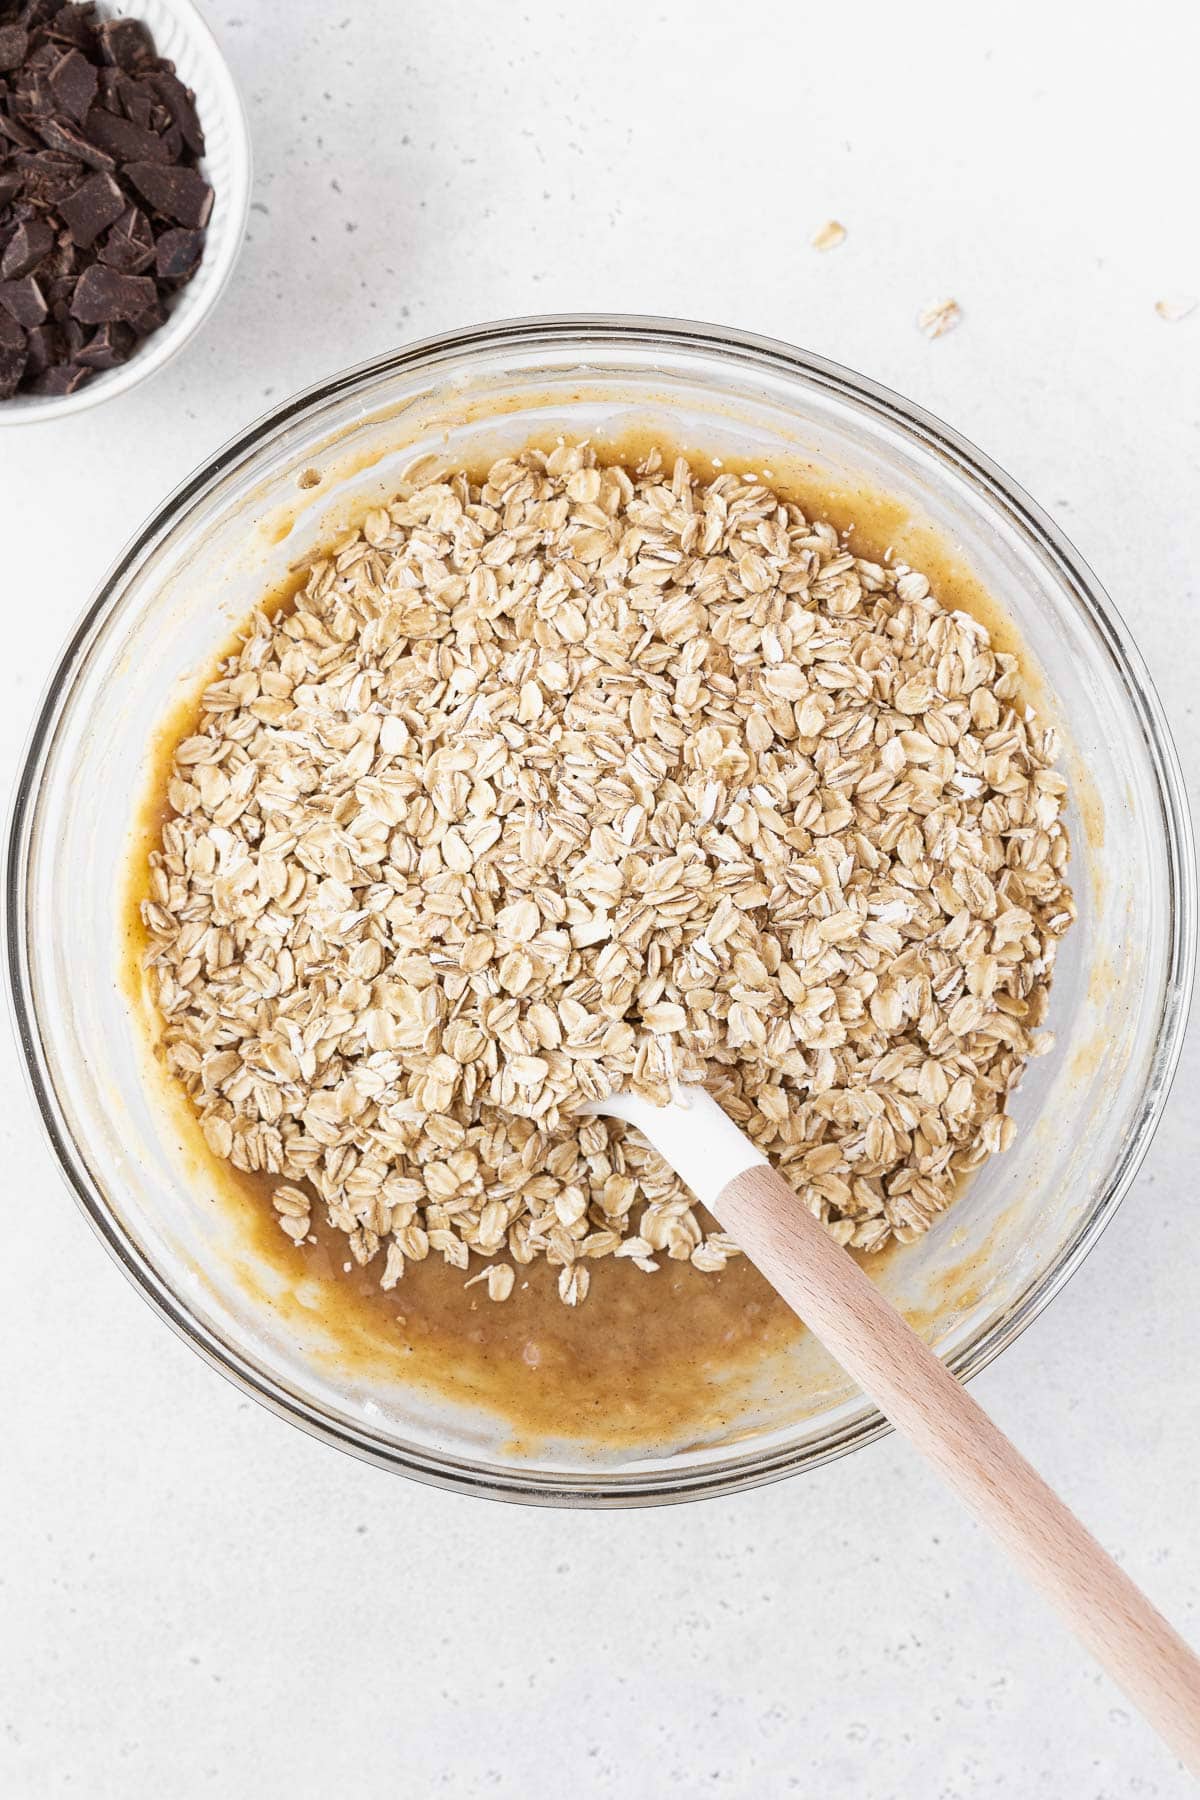 A mixing bowl of peanut butter banana bars with oatmeal on top.